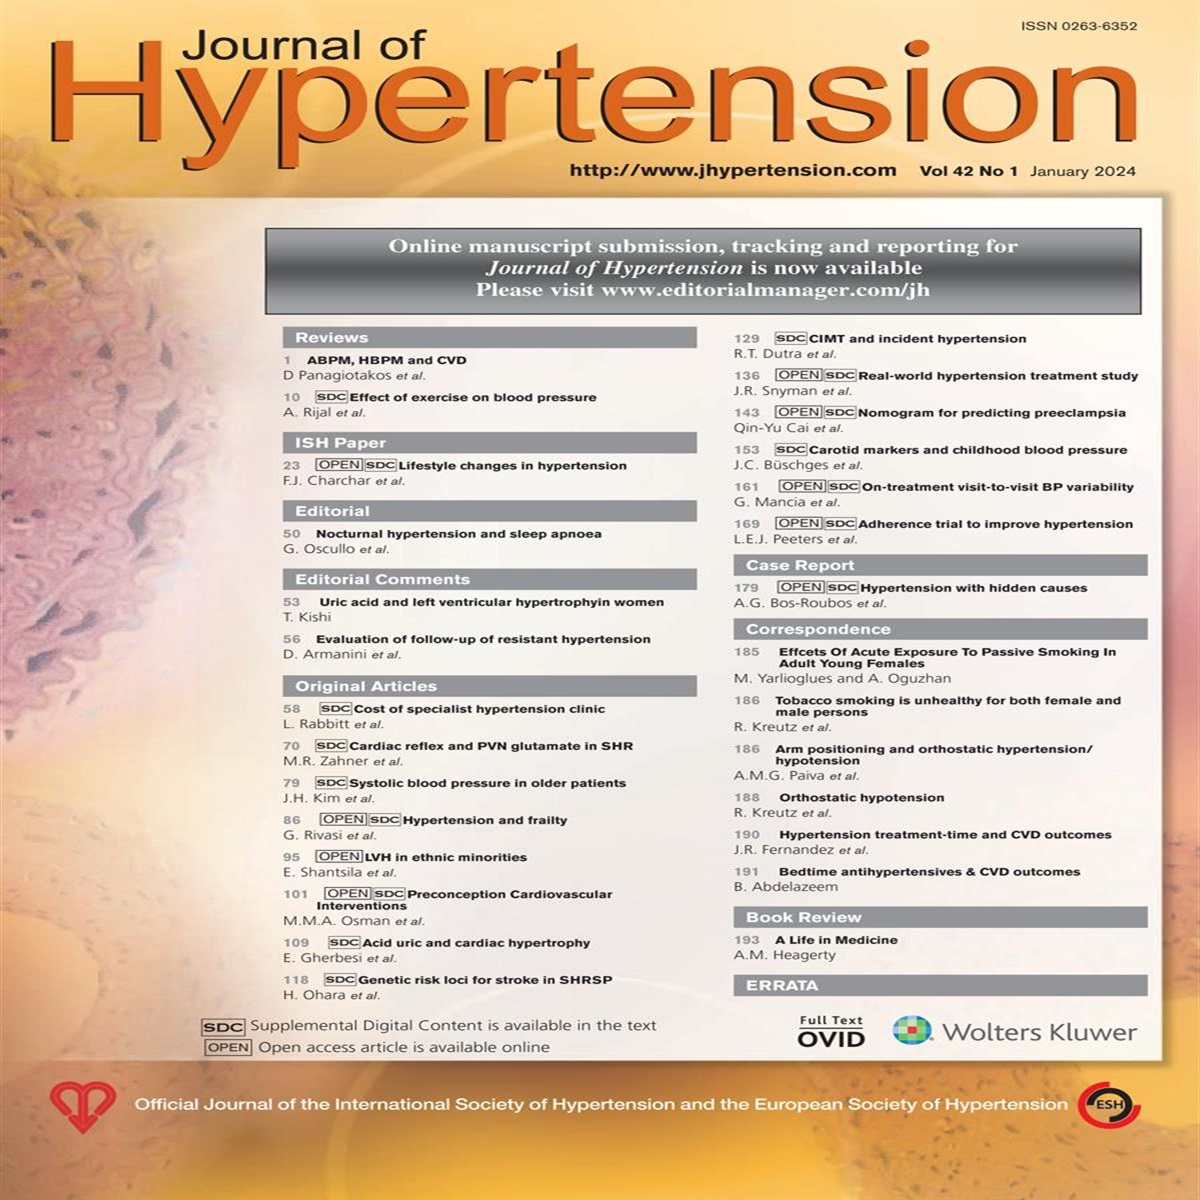 Reply to ‘Diabetes and orthostatic hypotension: are all patients treated equal?’: Erratum